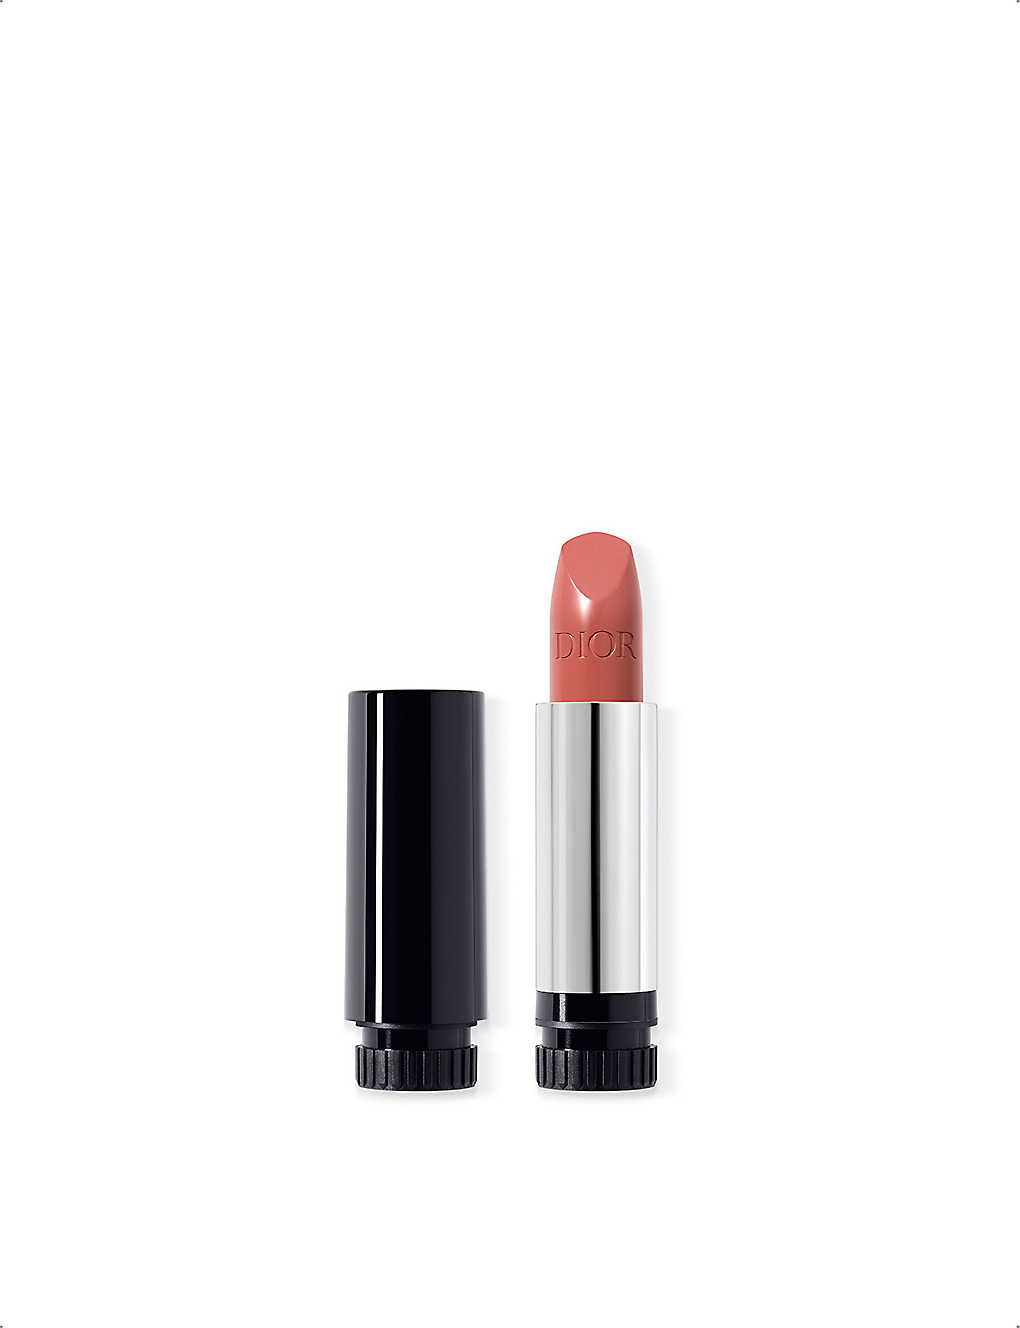 Dior 100 Nude Look Rouge Satin Lipstick Refill 3.5g